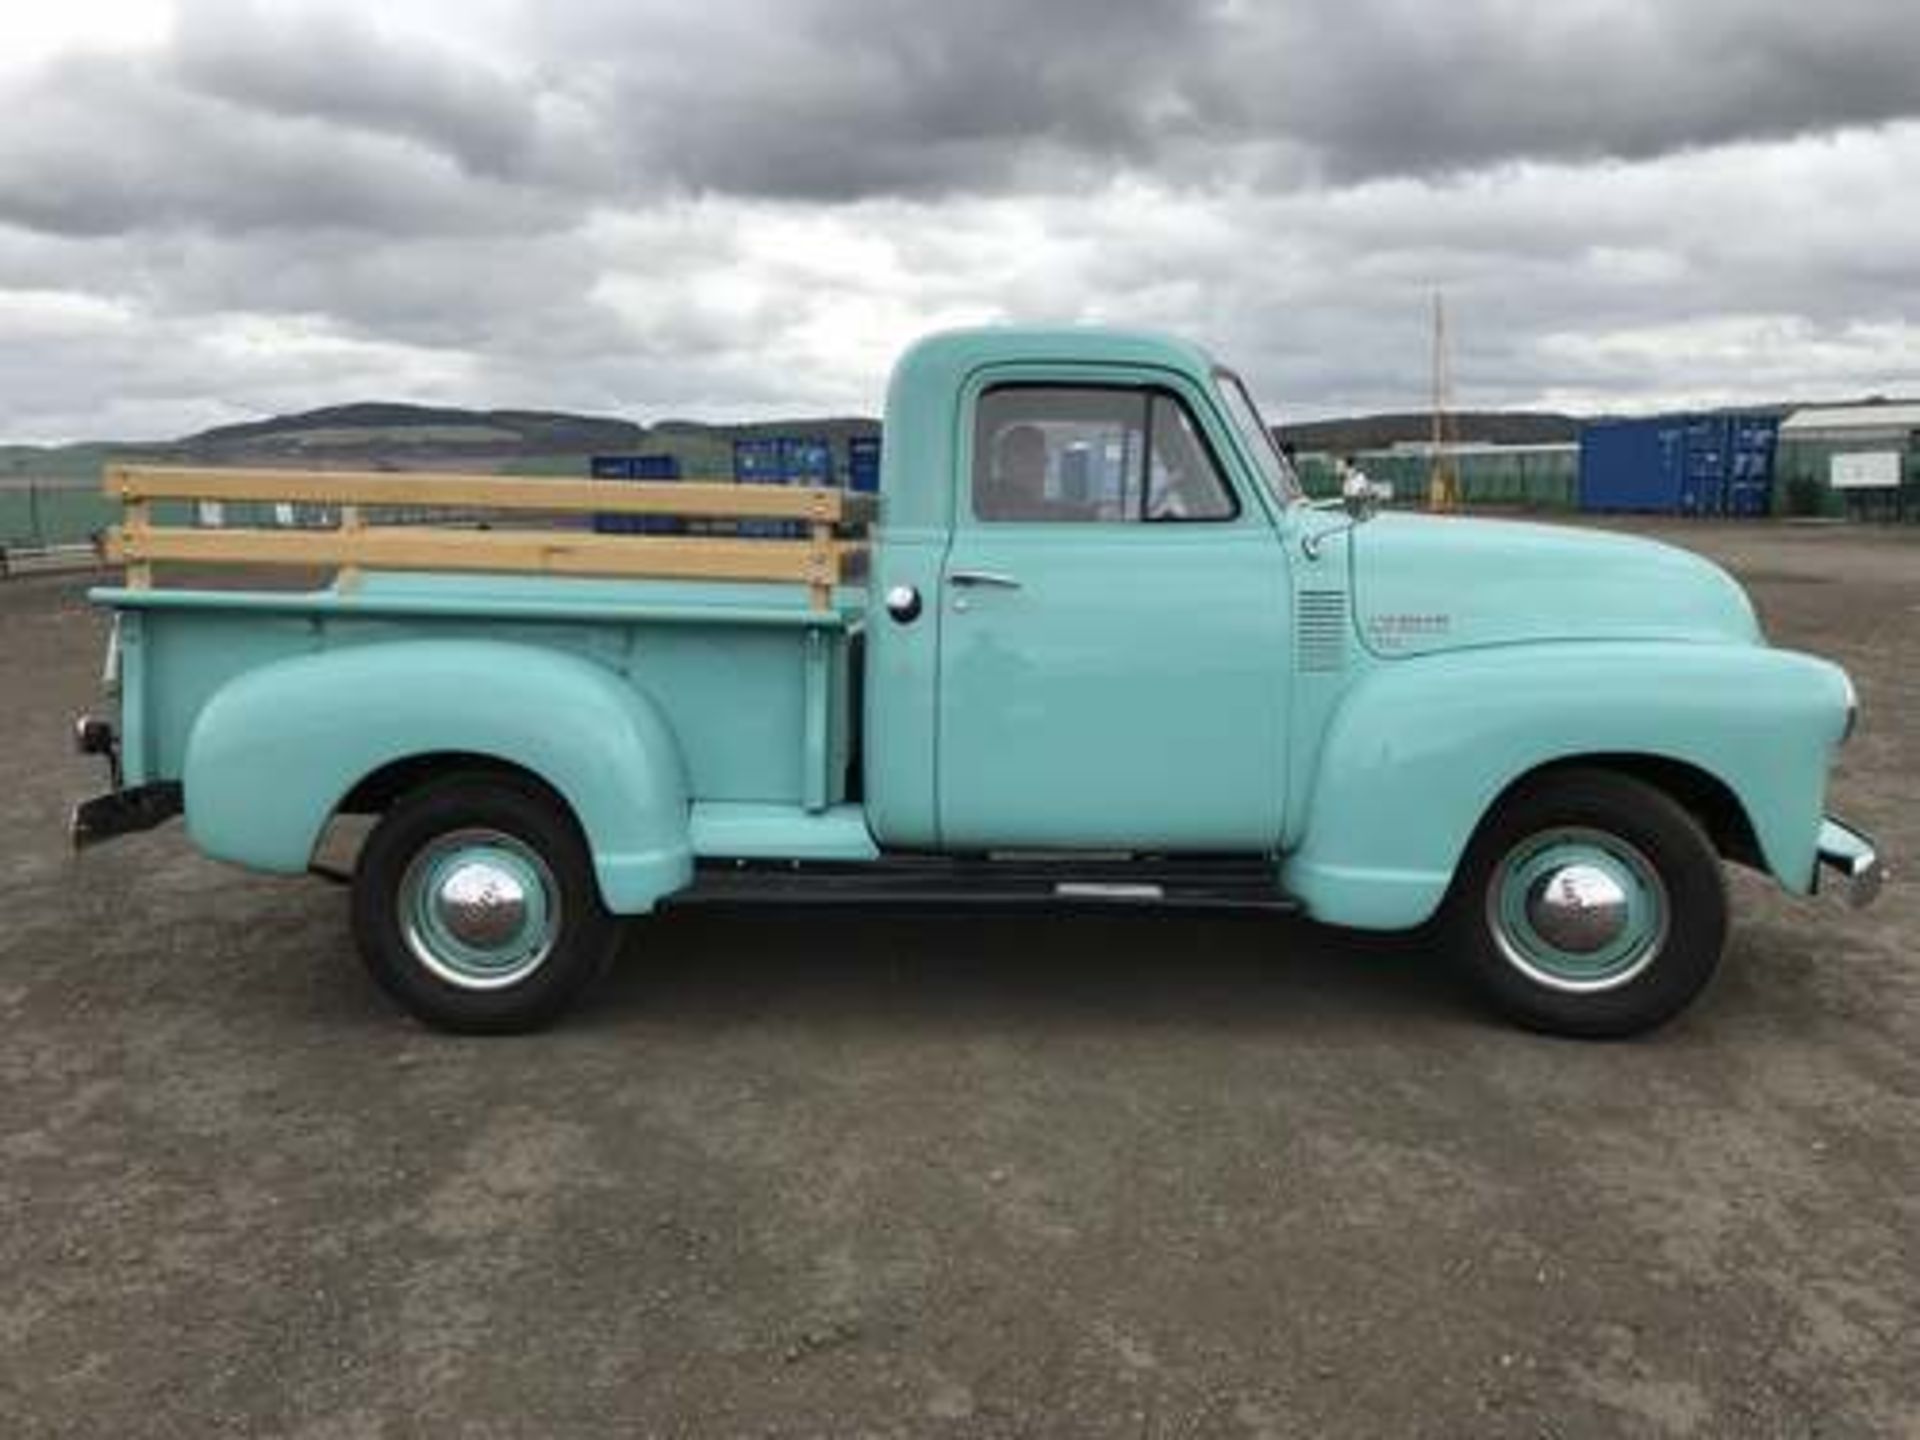 CHEVROLET 3100 PICK UP - 3500cc - Image 9 of 16